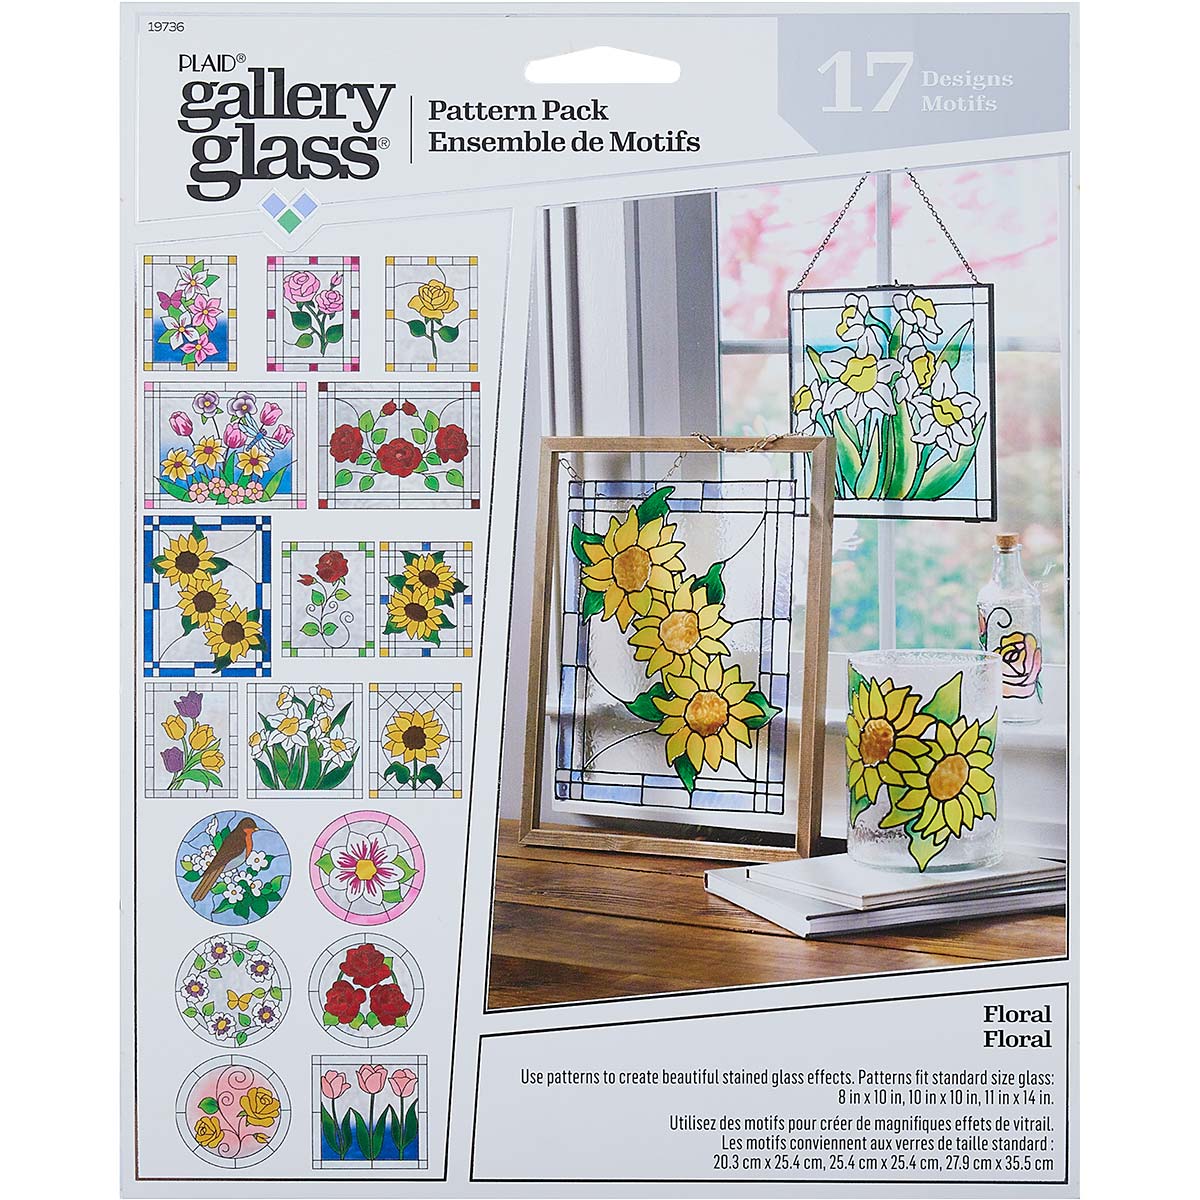 Gallery Glass, Hexagon 3 Piece Surface Perfect for Stained Glass DIY Arts and Crafts, 19769